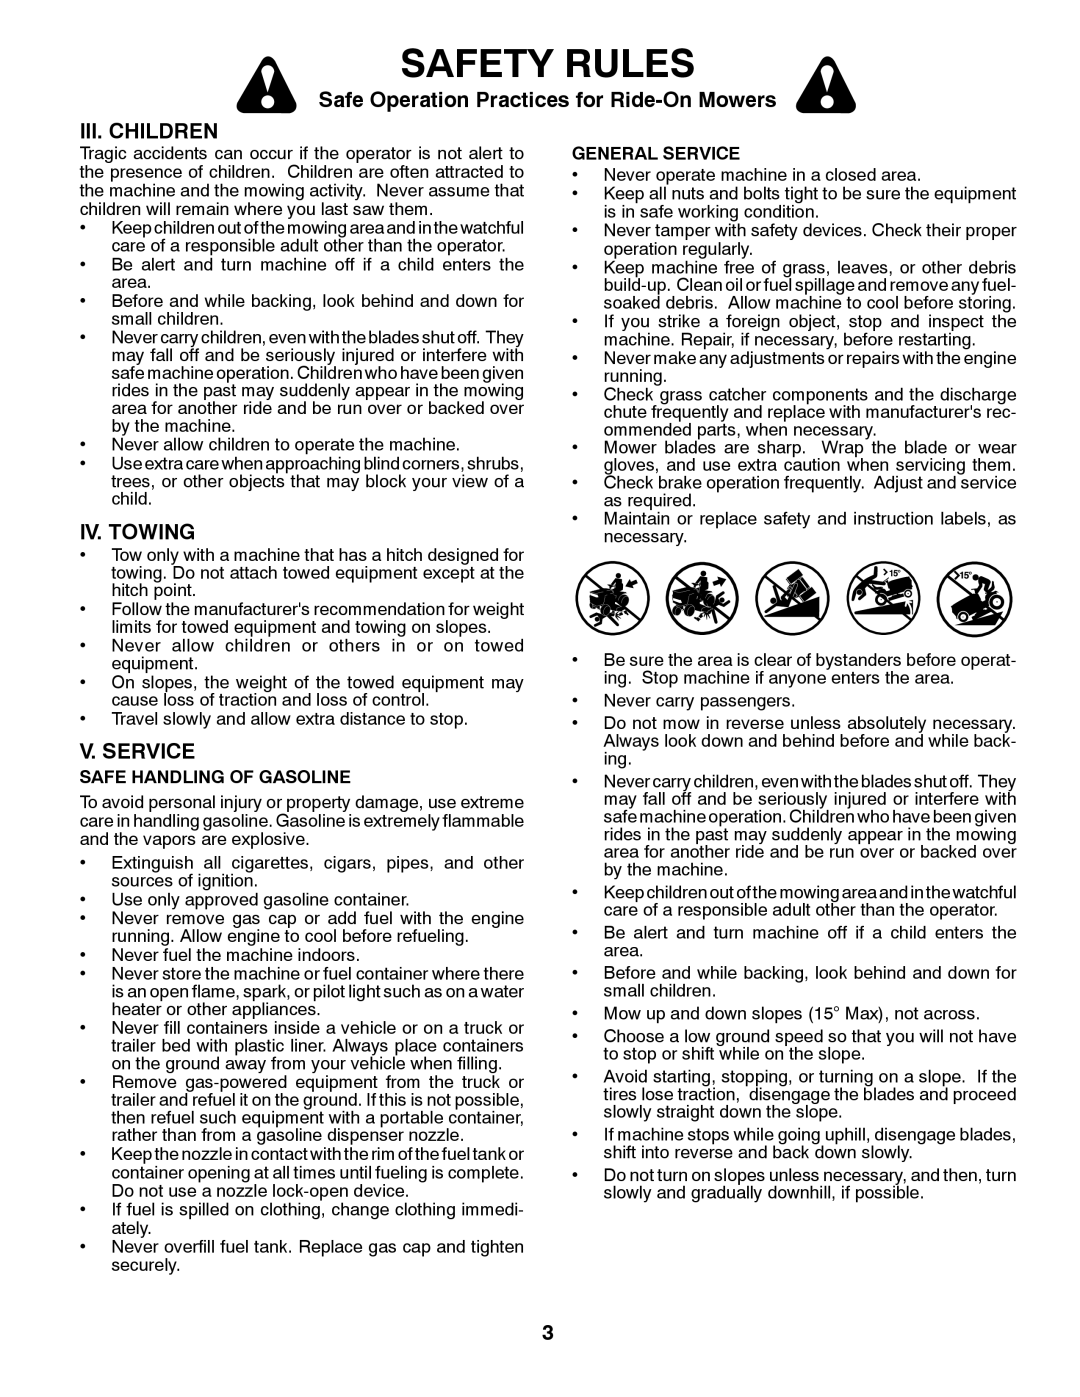 Husqvarna 532 43 62-68 Iii. Children, Iv. Towing, V. Service, Safety Rules, Safe Operation Practices for Ride-On Mowers 